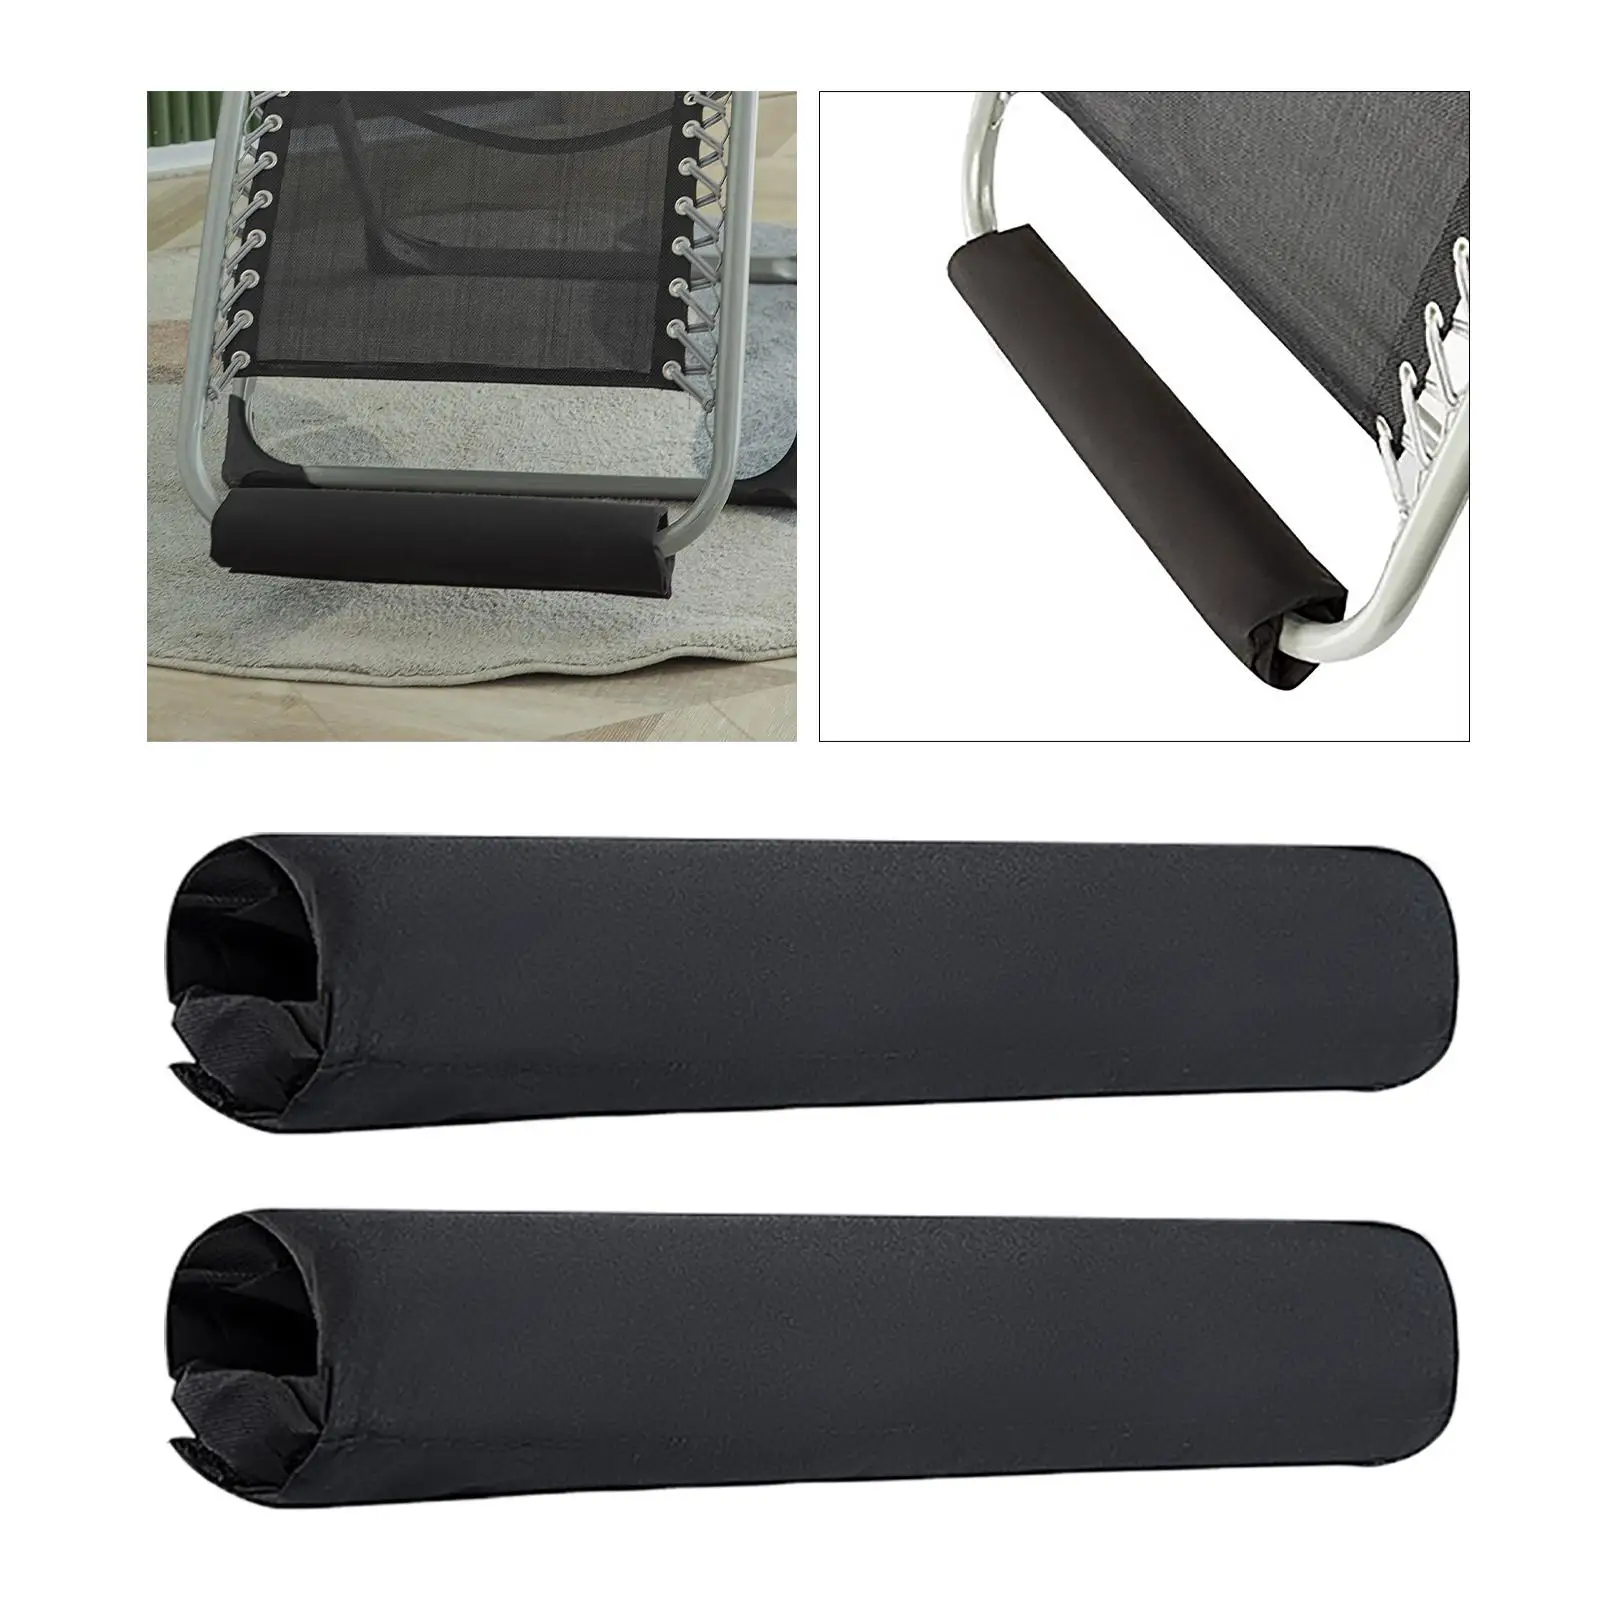 Folding Camping Chair Footrest Padding Foot Support Lounge Chair Foot Pad for Lounge Lawn Patio Outdoor Accessories